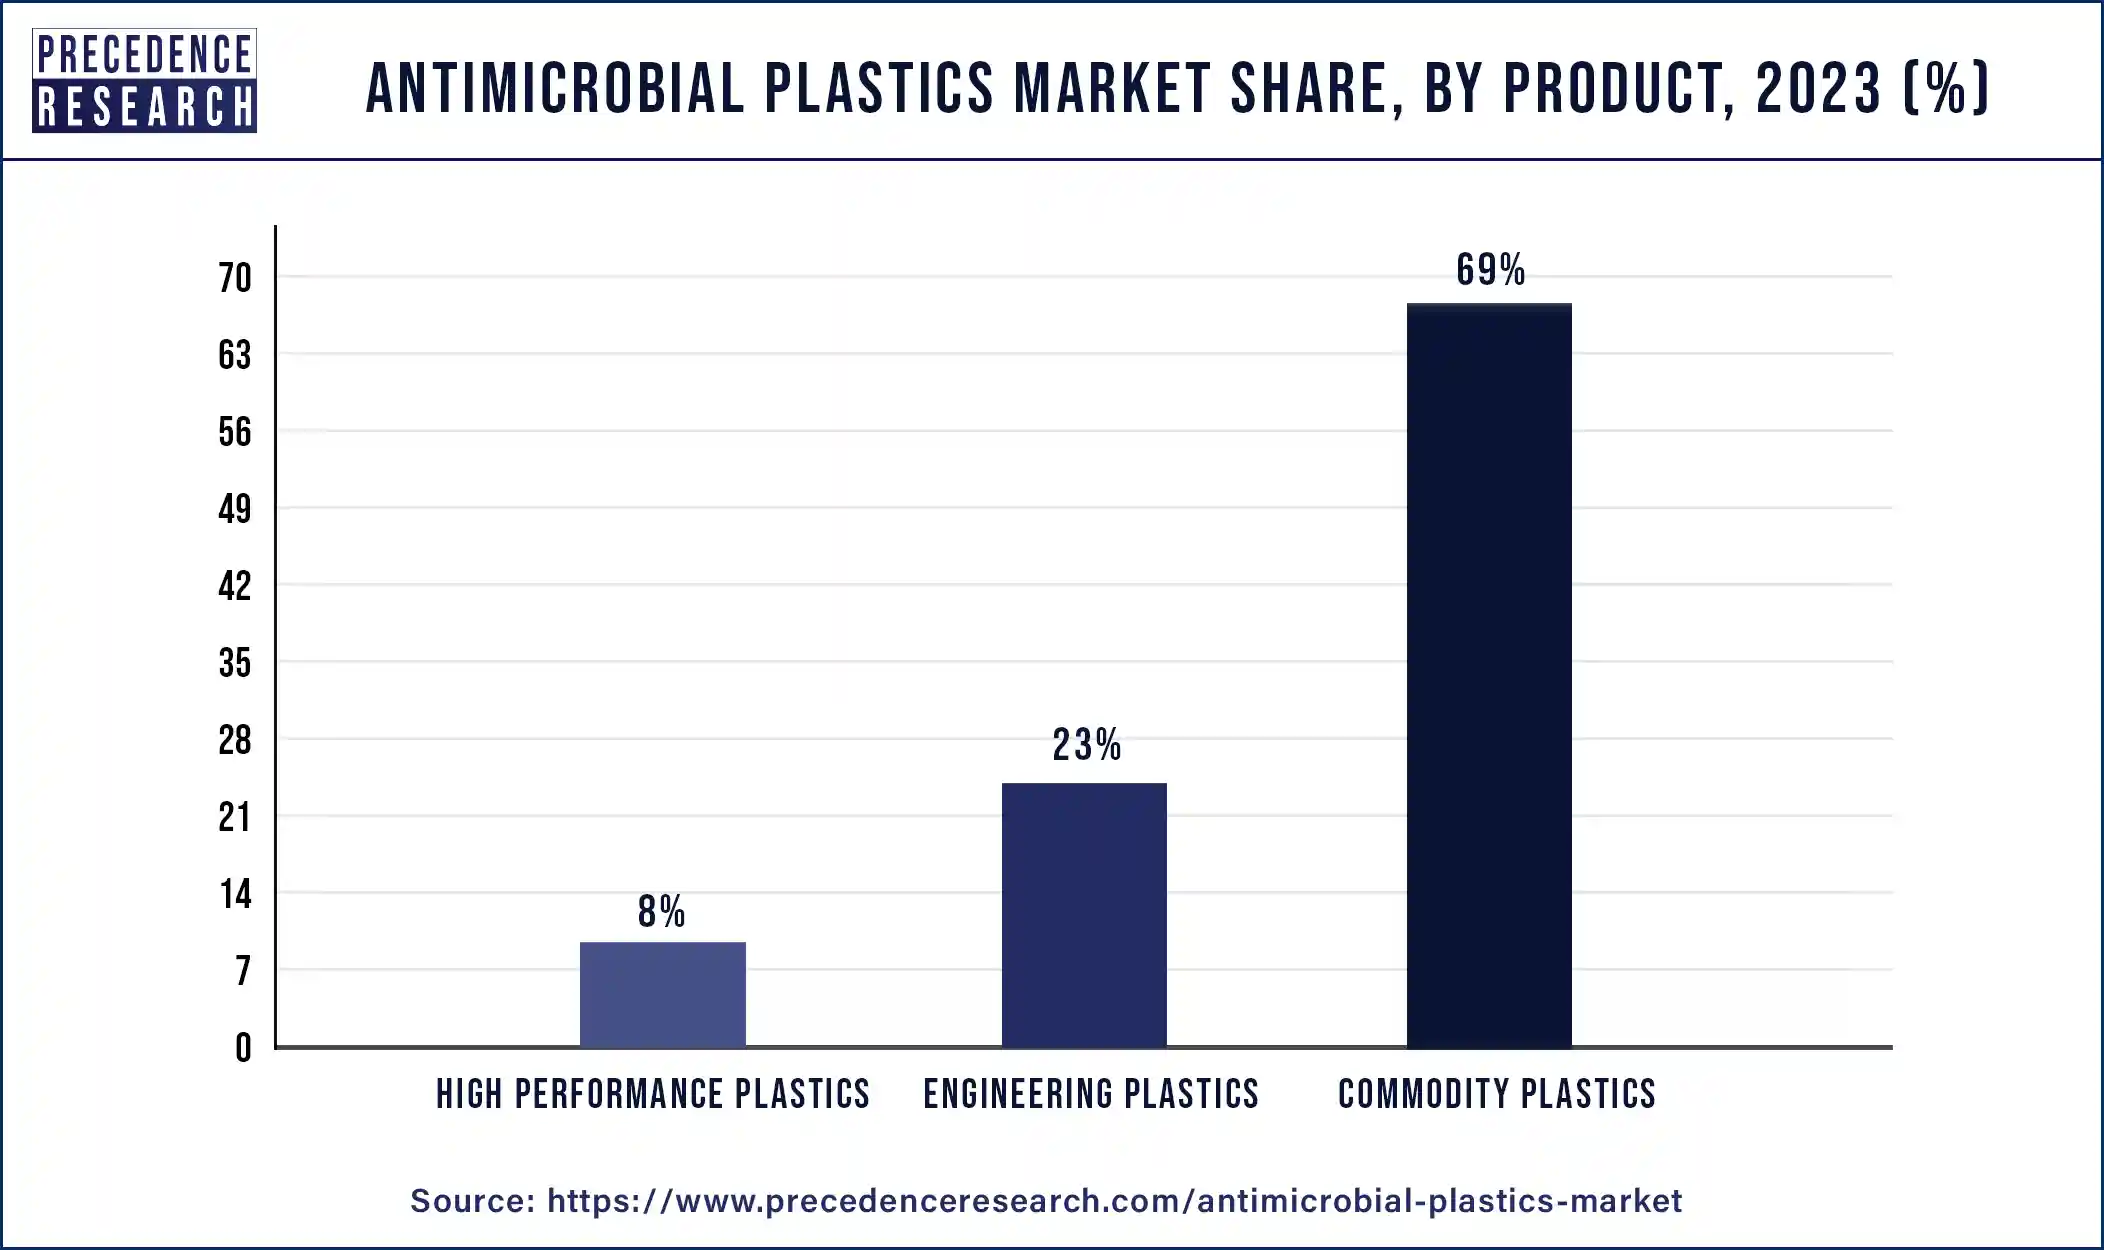 Antimicrobial Plastics Market Share, By Product, 2023 (%)